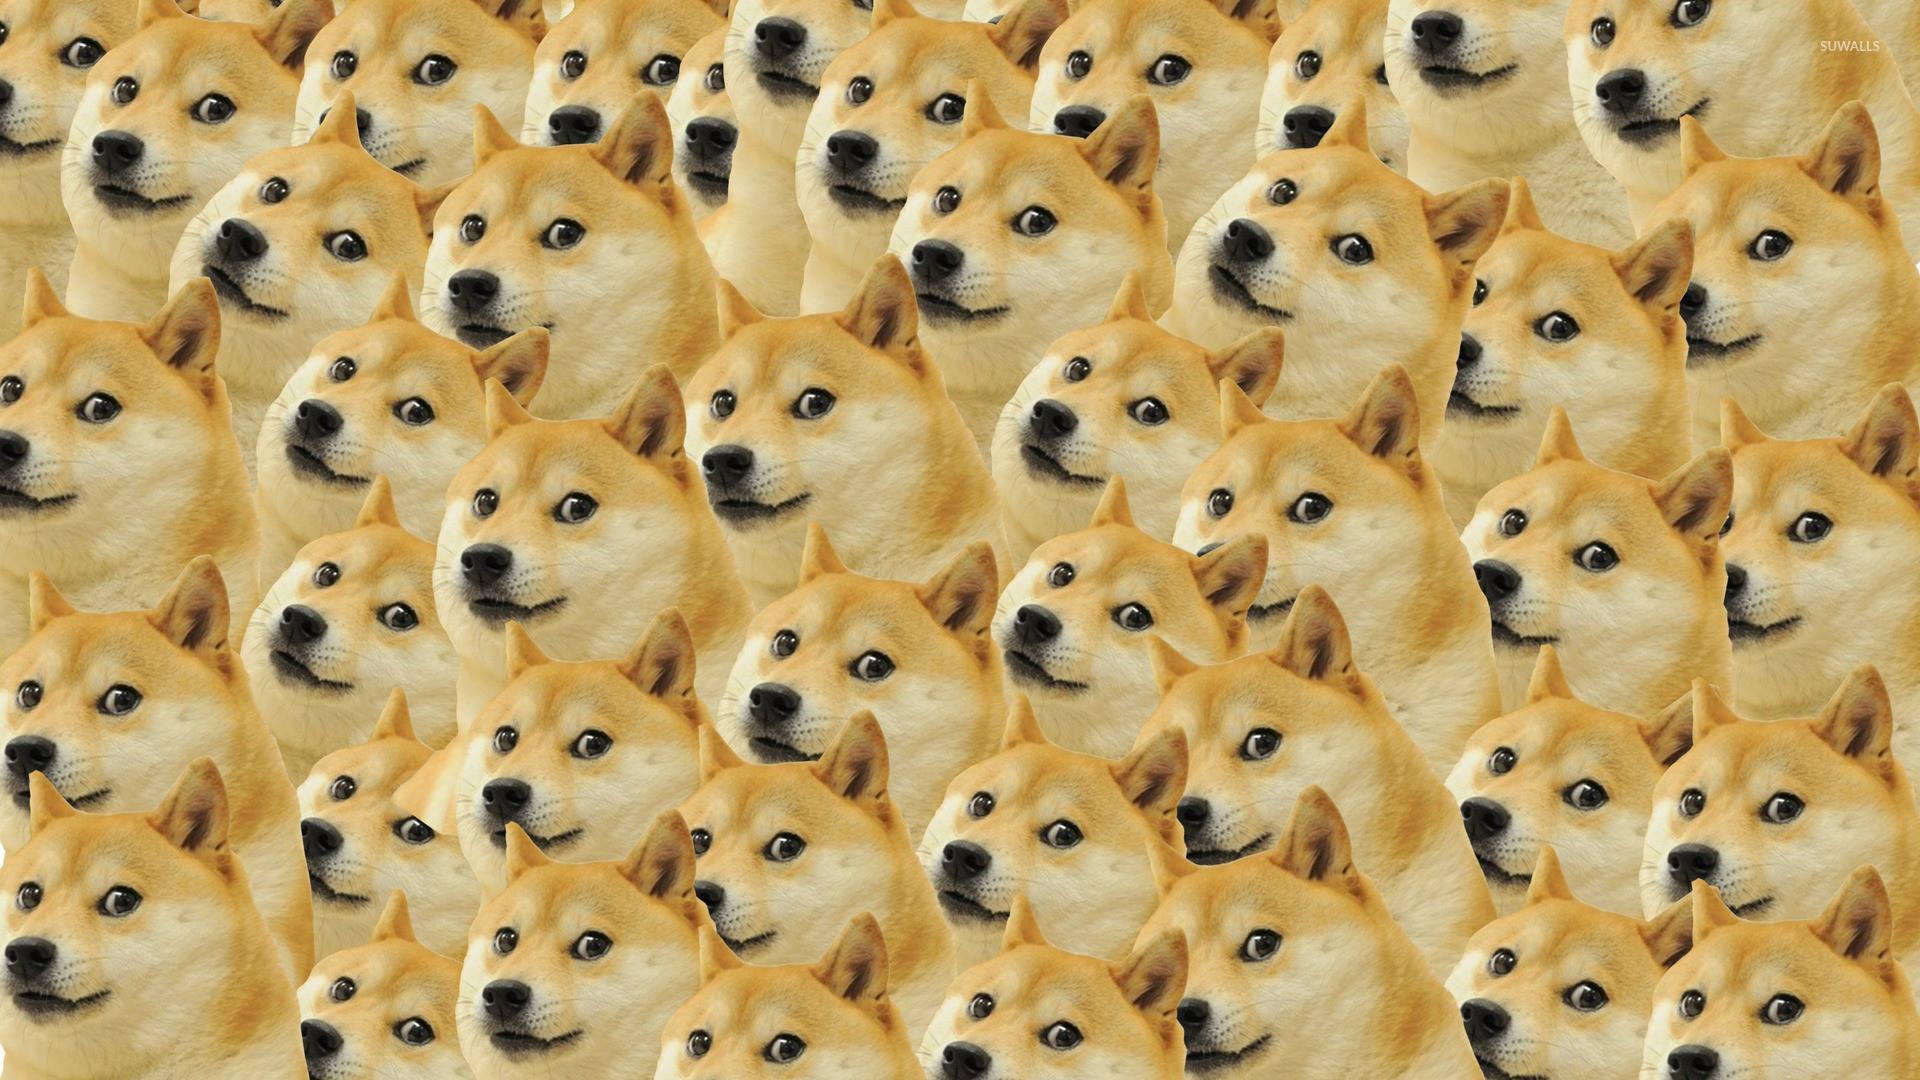 Dog Meme wallpapers collection